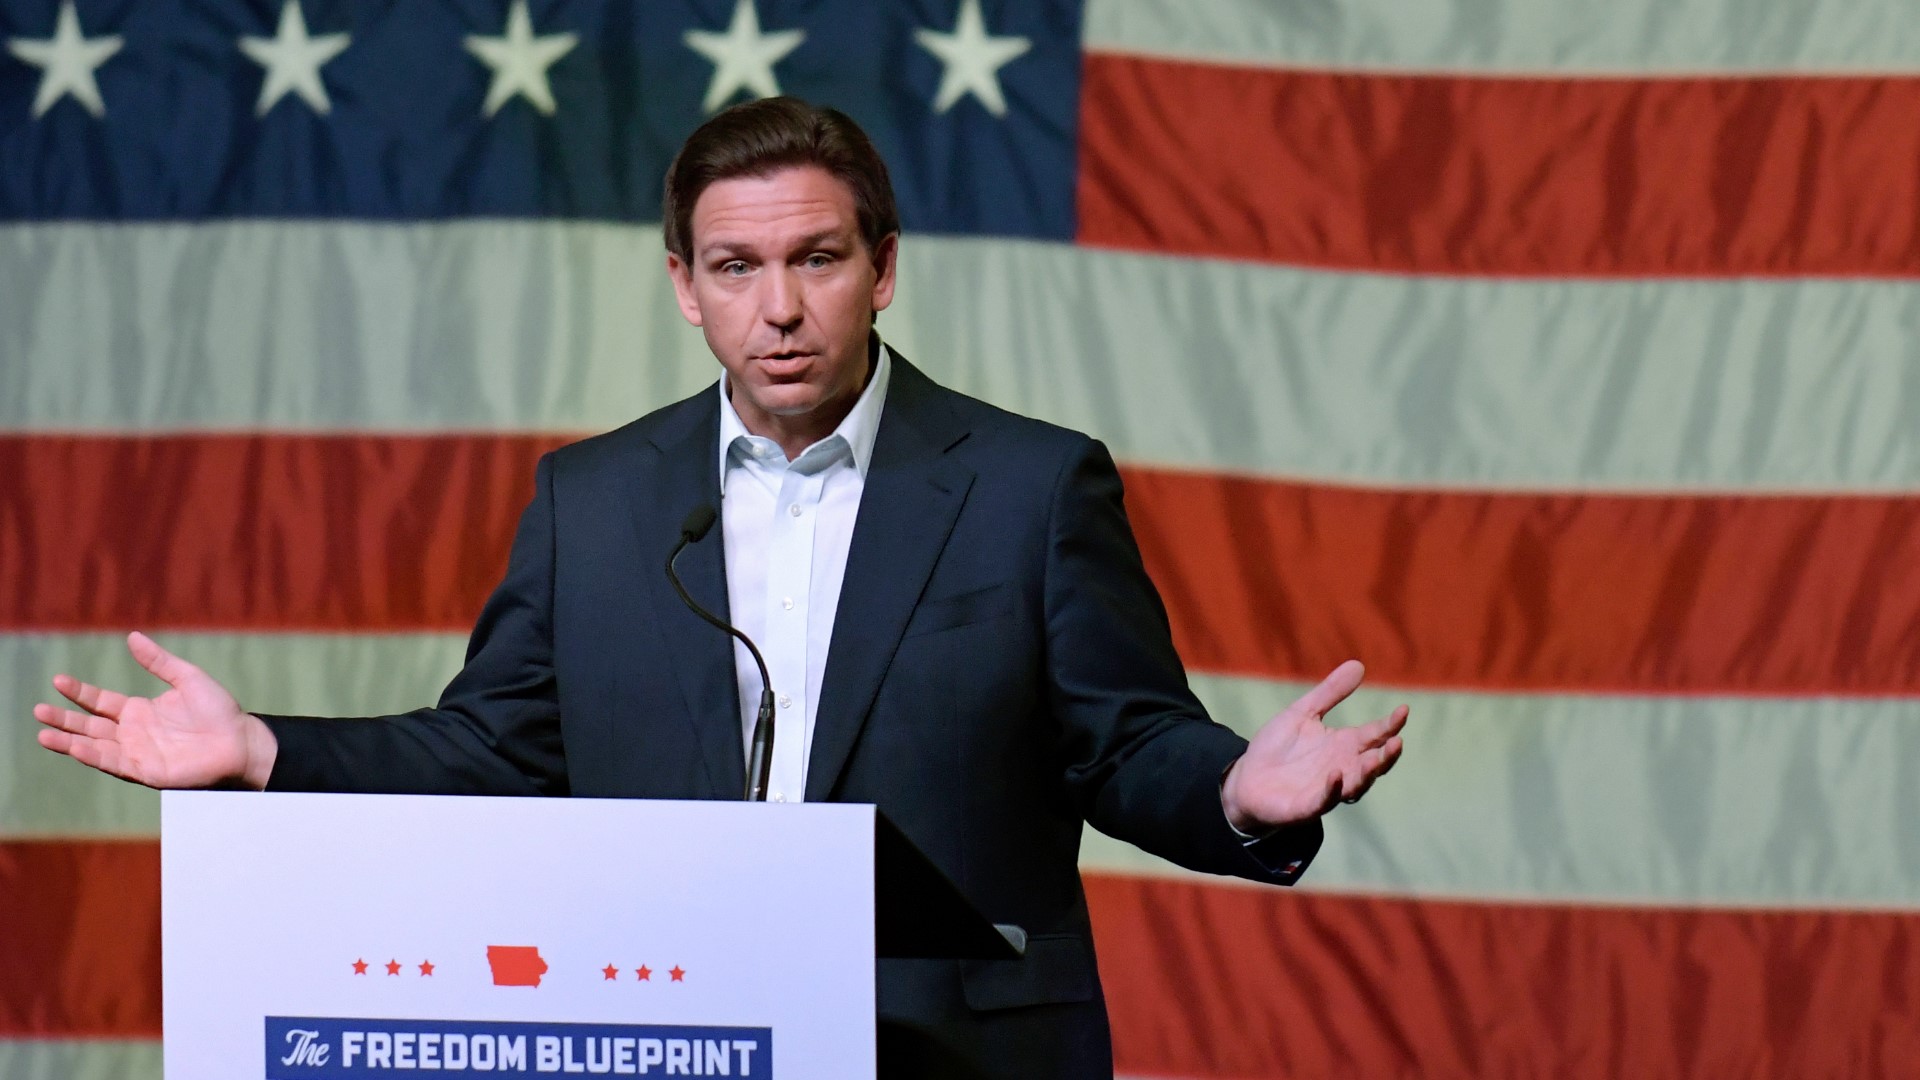 While DeSantis has yet to announce an official 2024 run, his trip echoes those of other Republican presidential hopefuls.